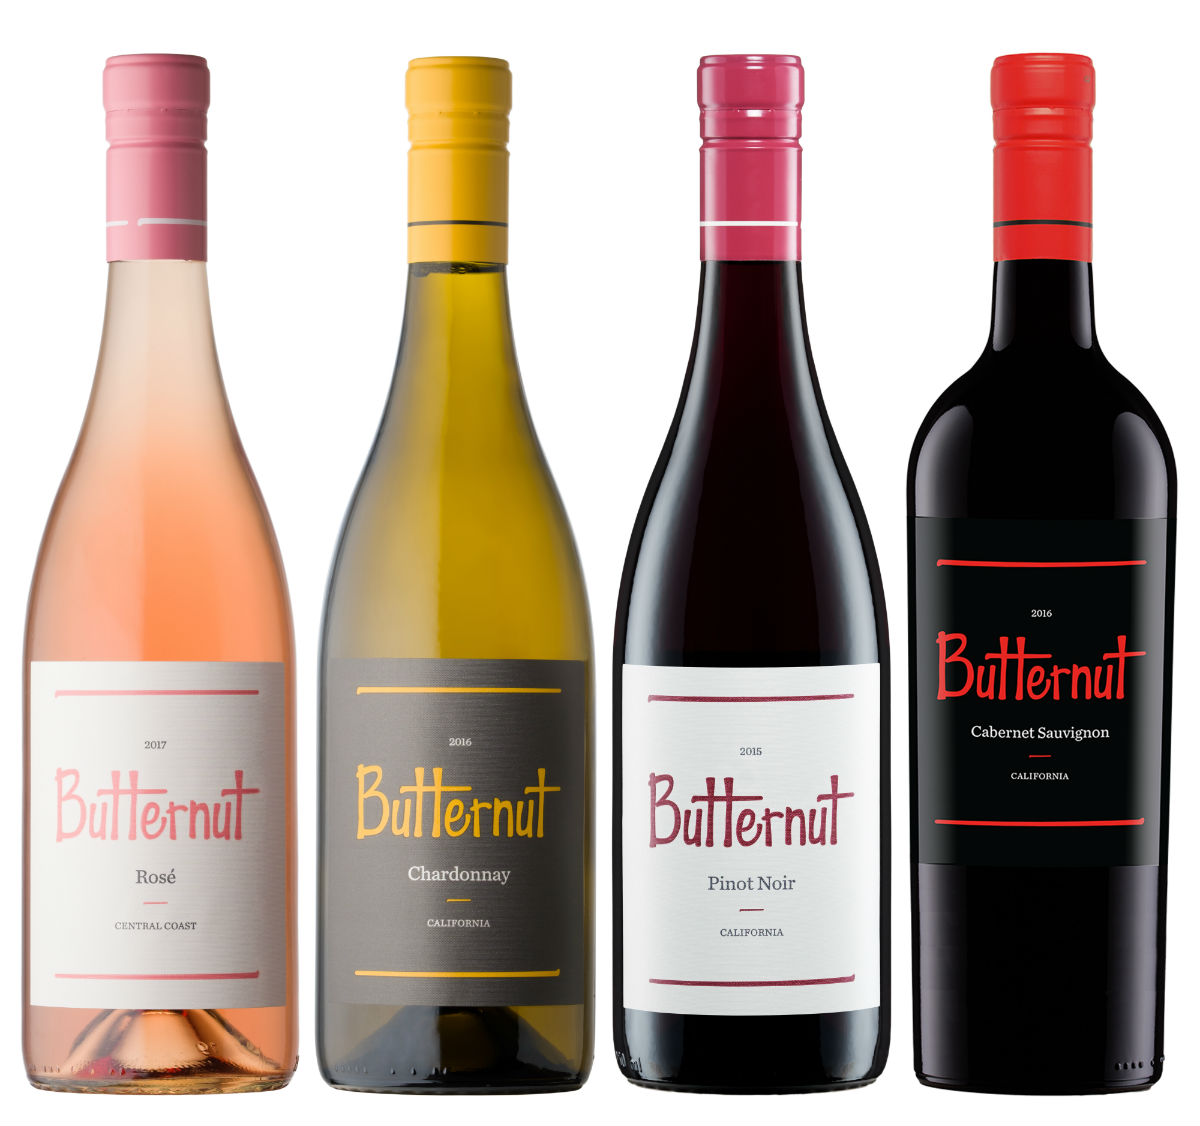 Miller Family Wine Company Acquires Bna Wine Groupâs Portfolio Of Wines photo